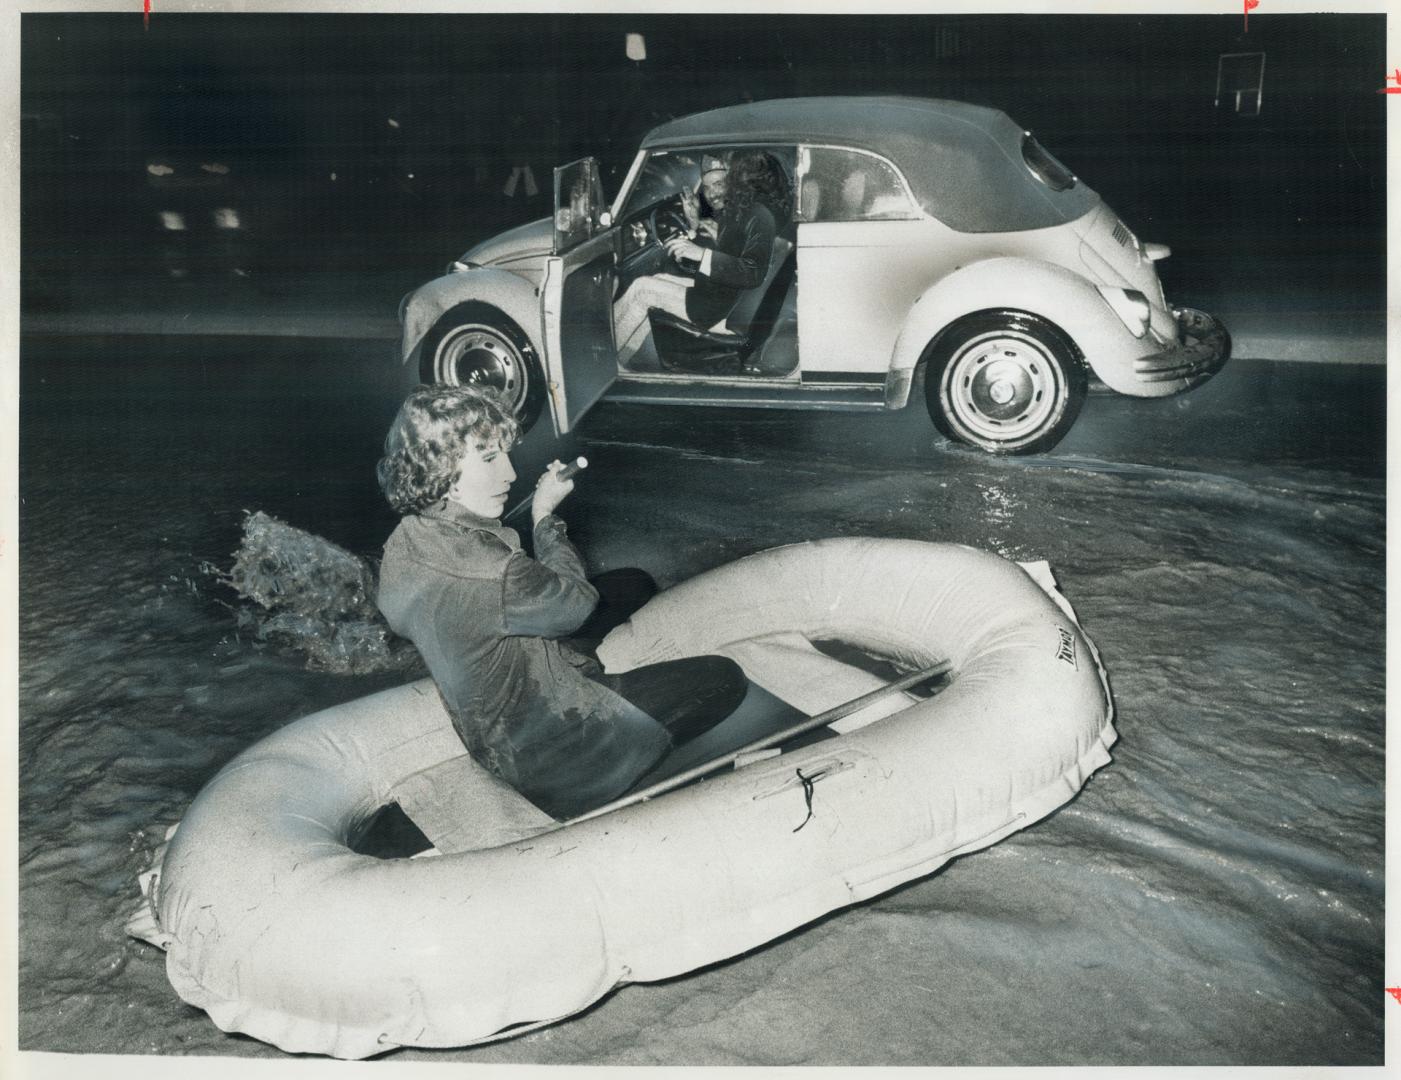 Paddling a rubber boat, 15-year-old Tony Cook passes a car stalled on Queen Frederica Dr. in Mississauga